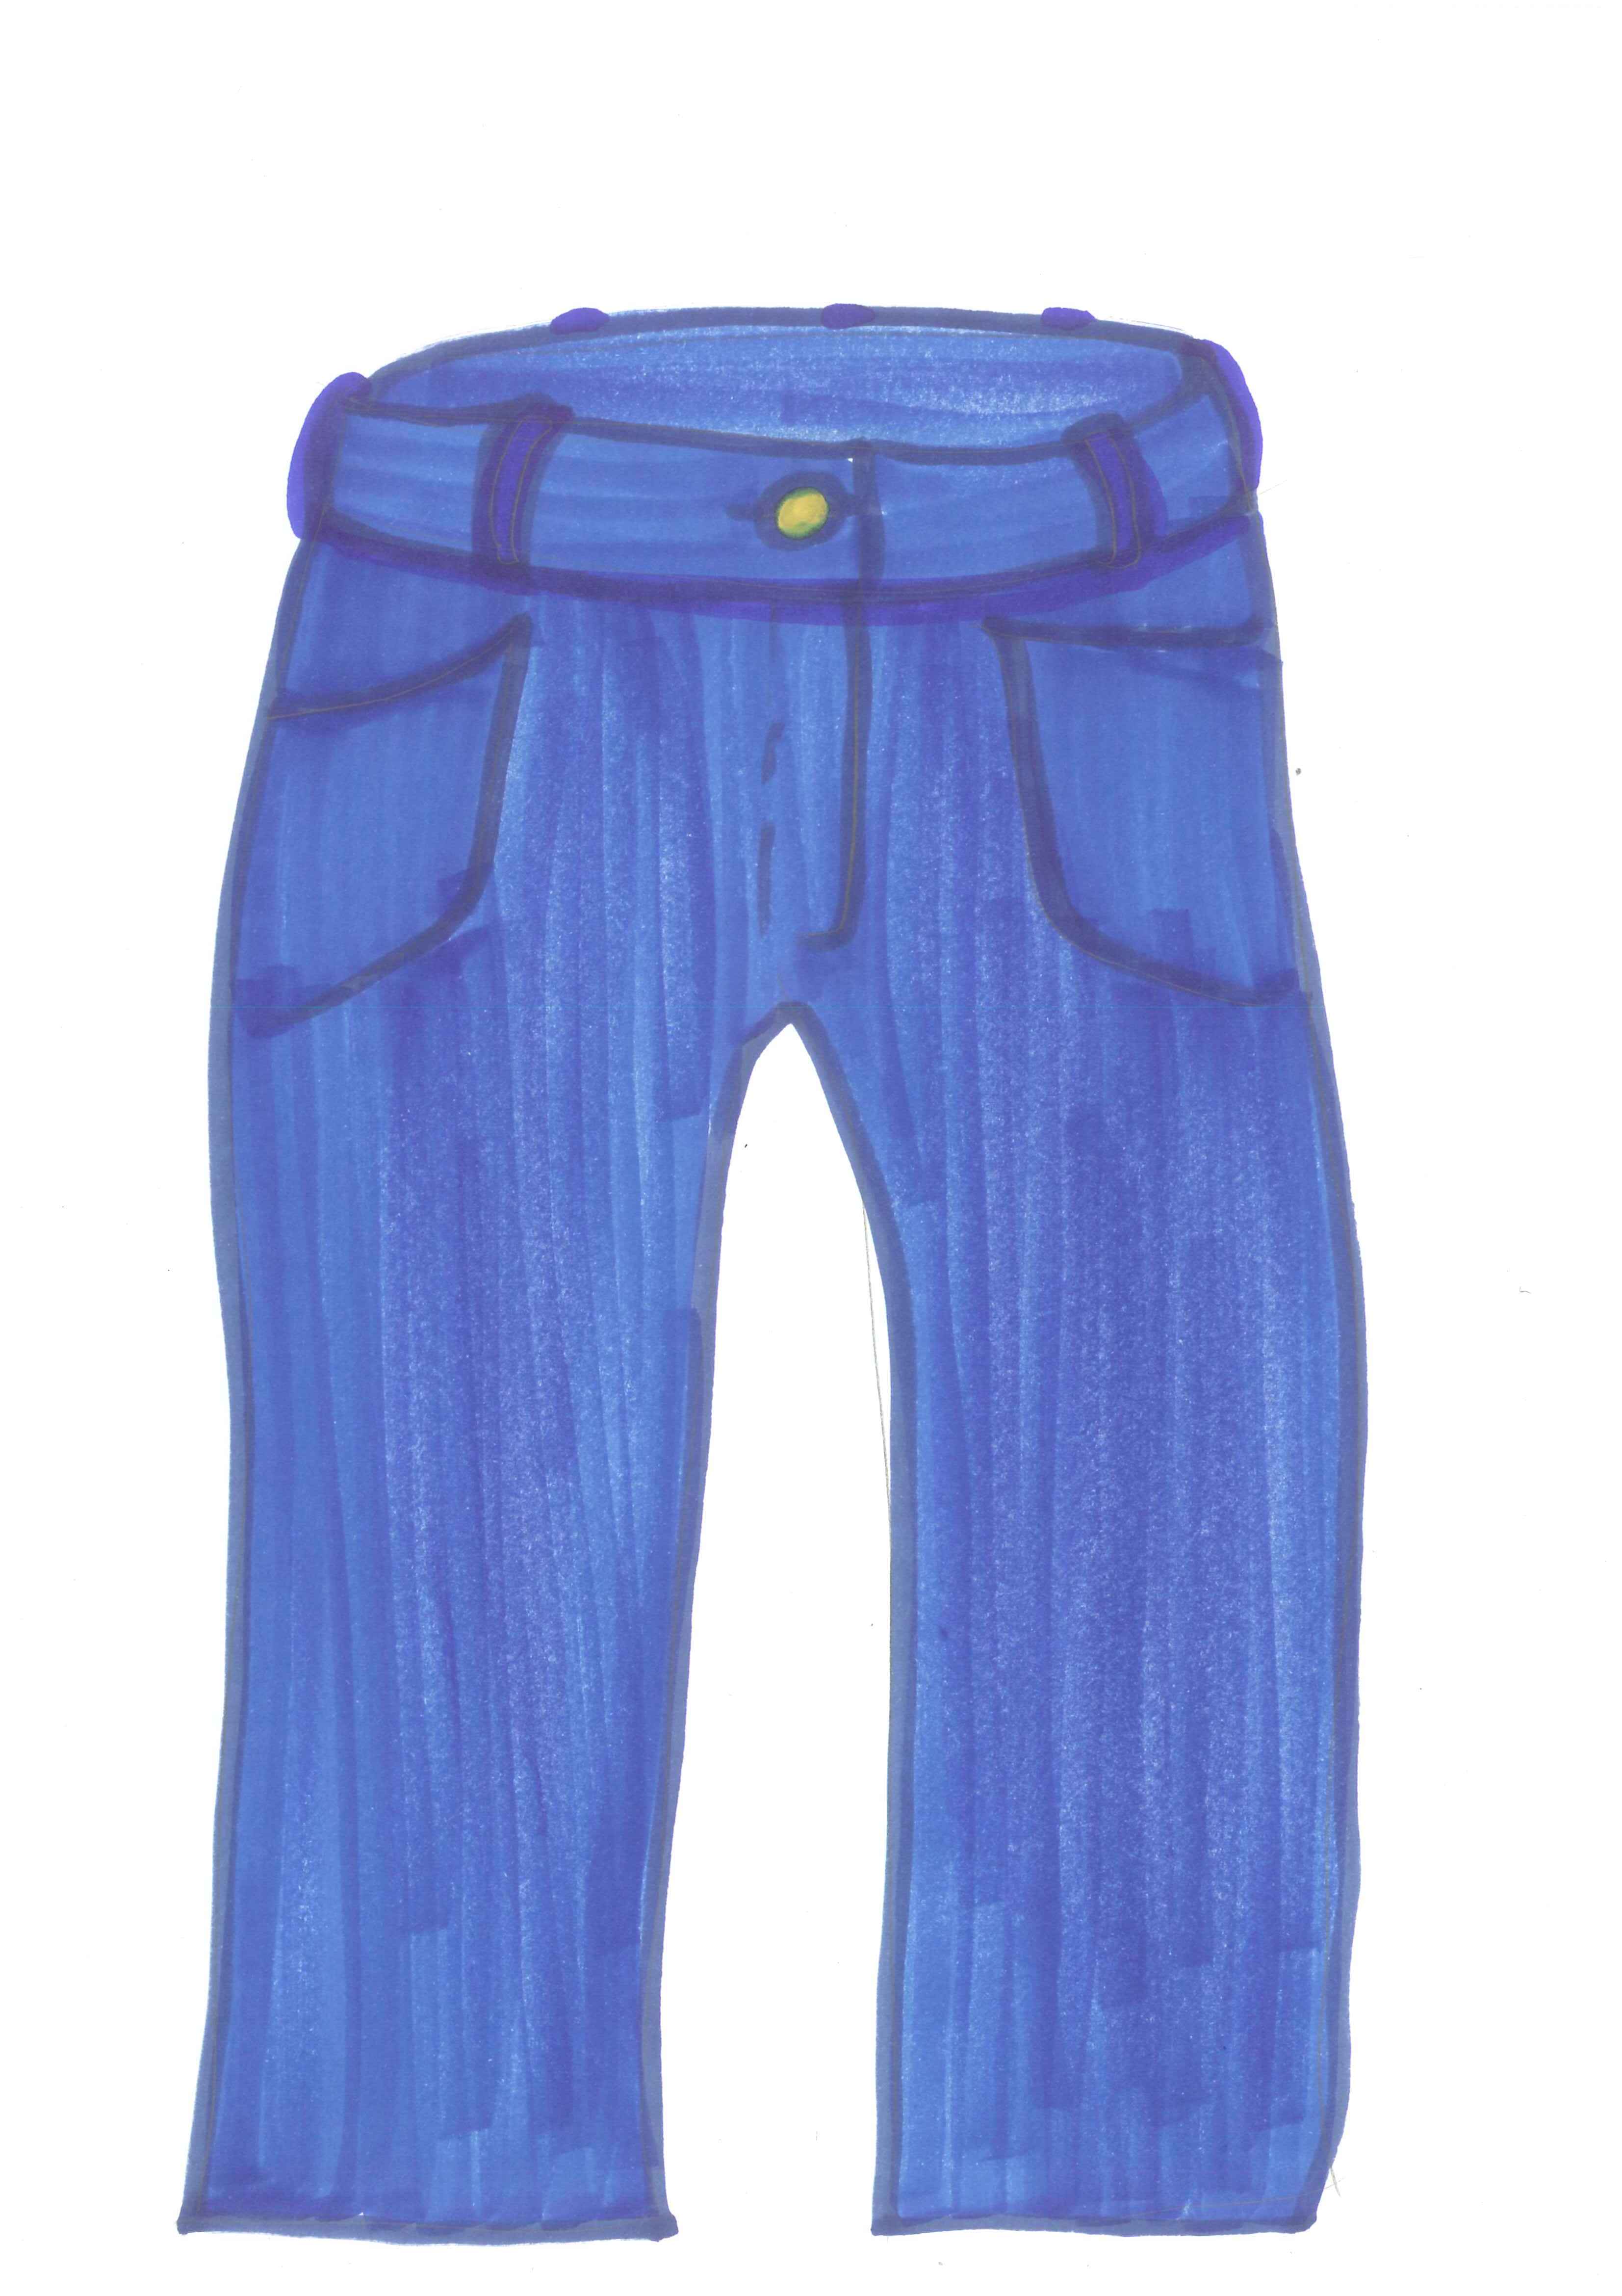 clipart of jeans - photo #29